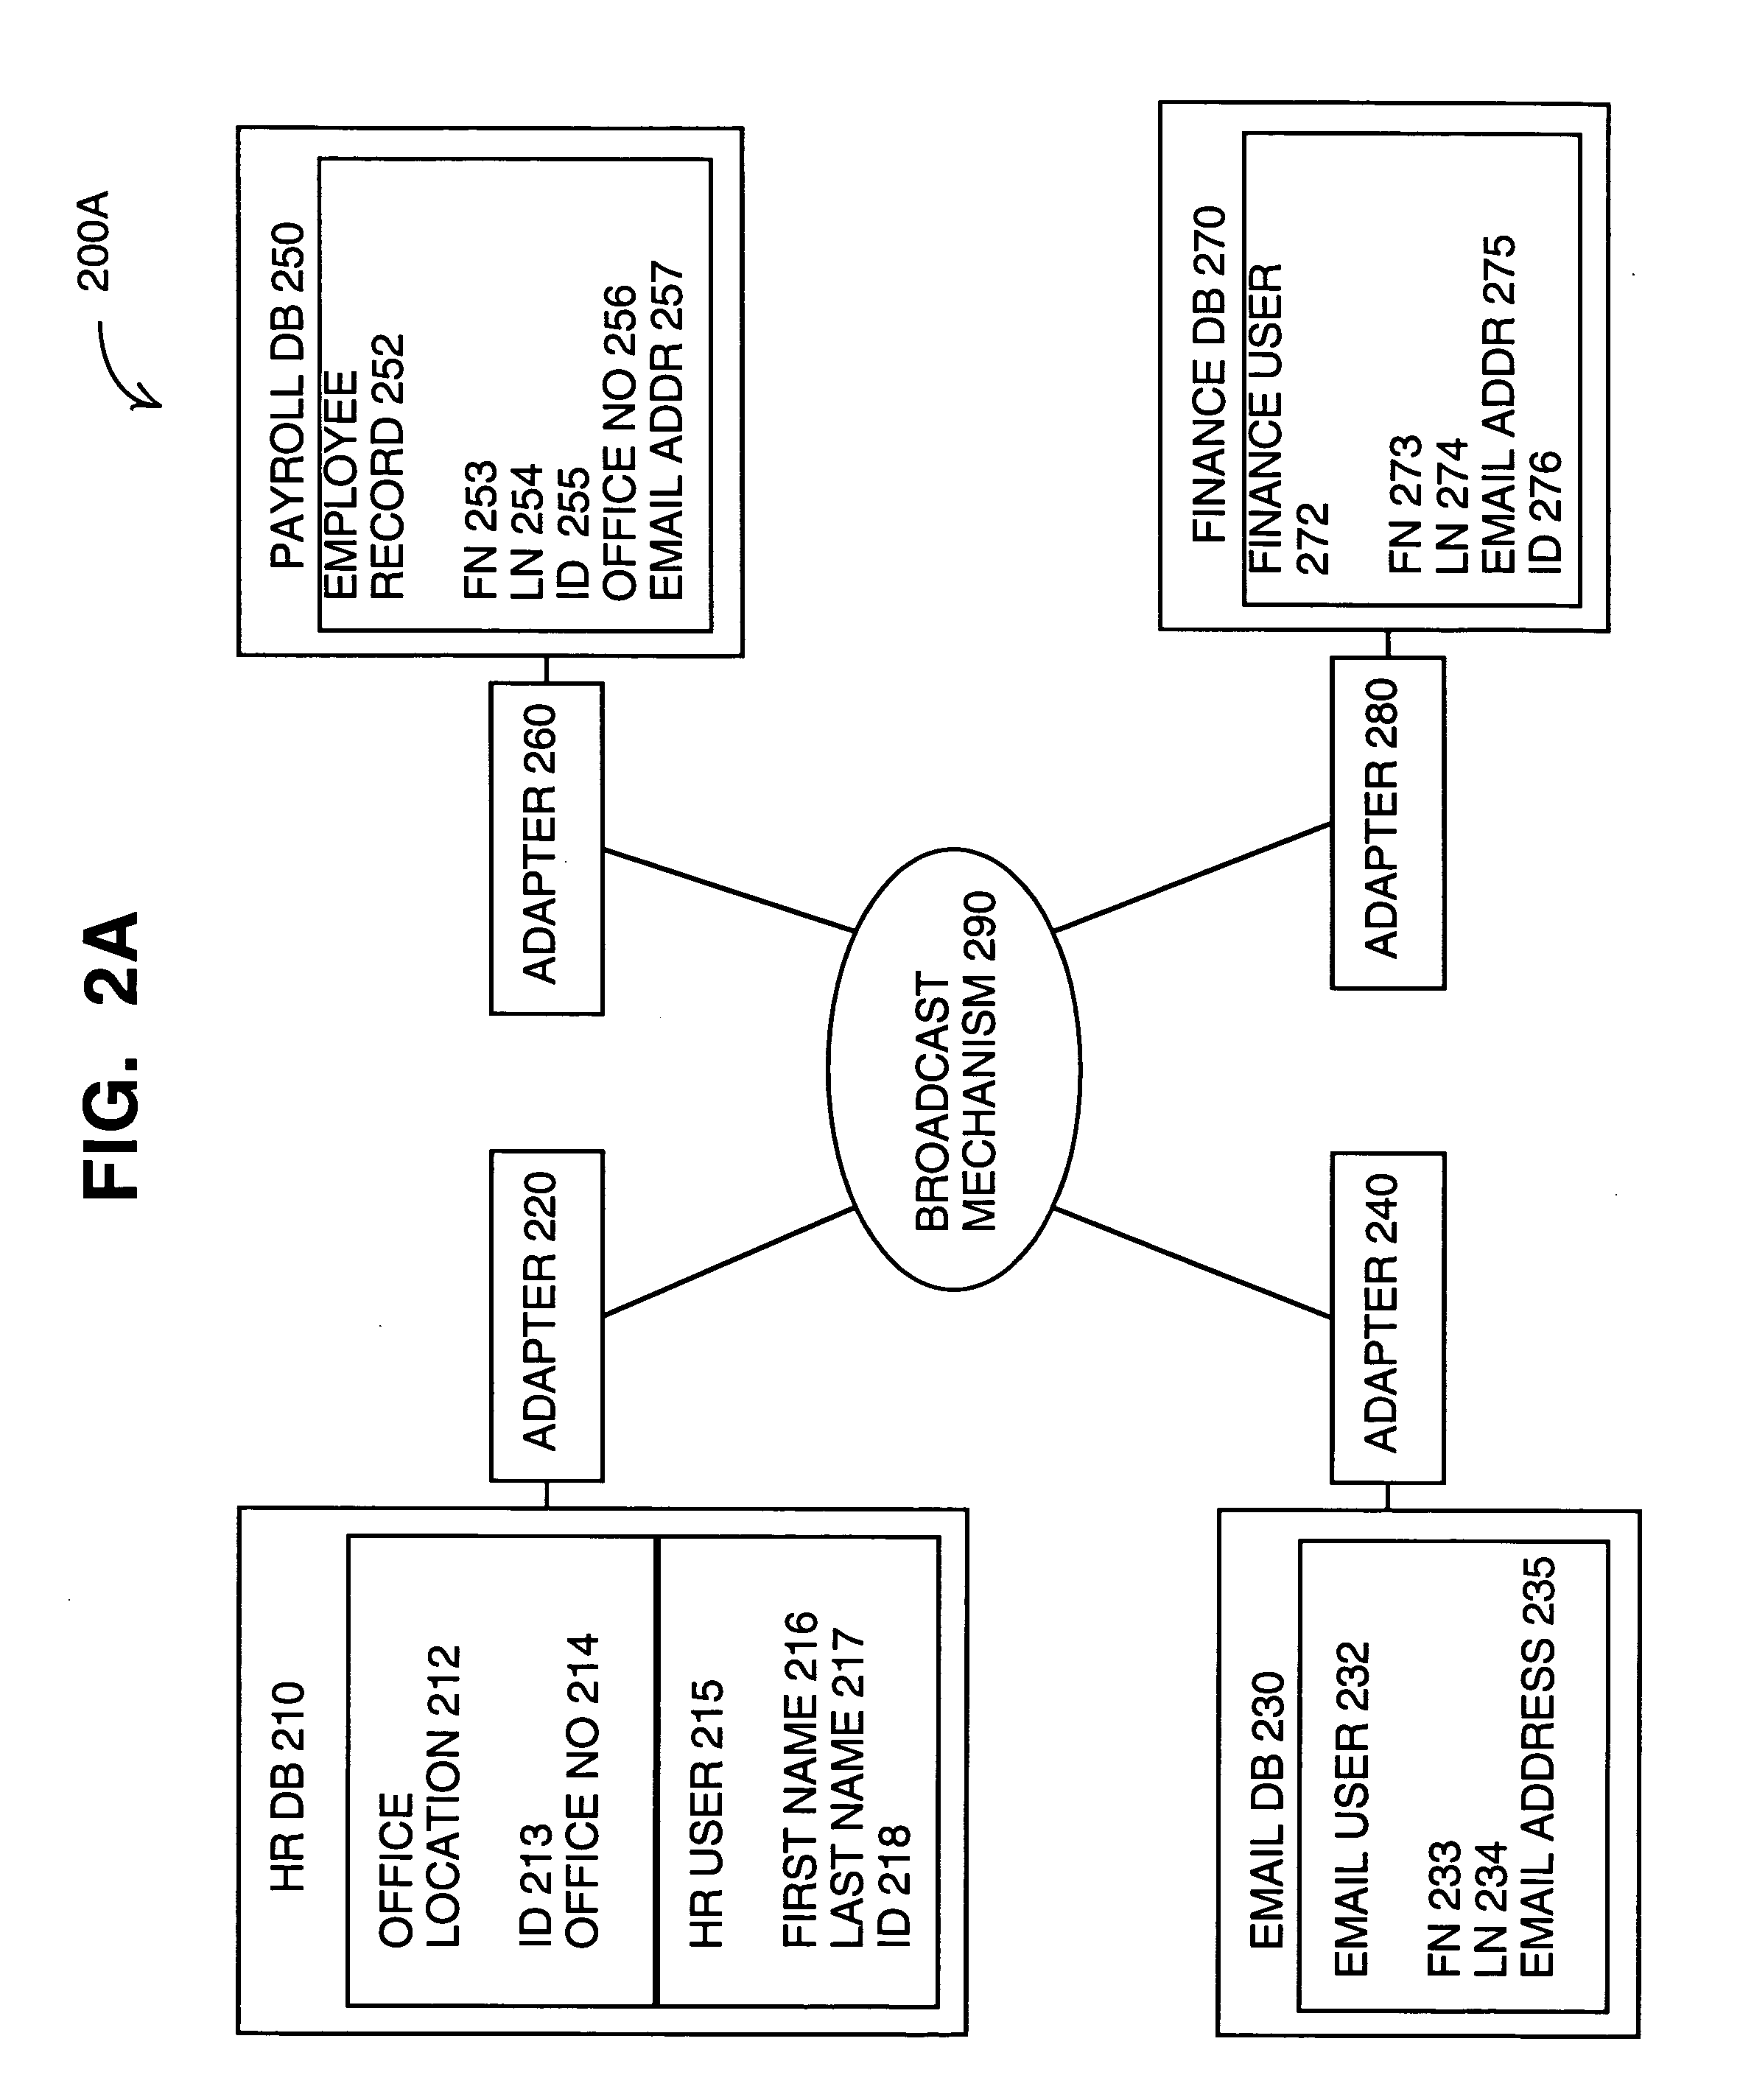 Synchronizing and consolidating information from multiple source systems of a distributed enterprise information system